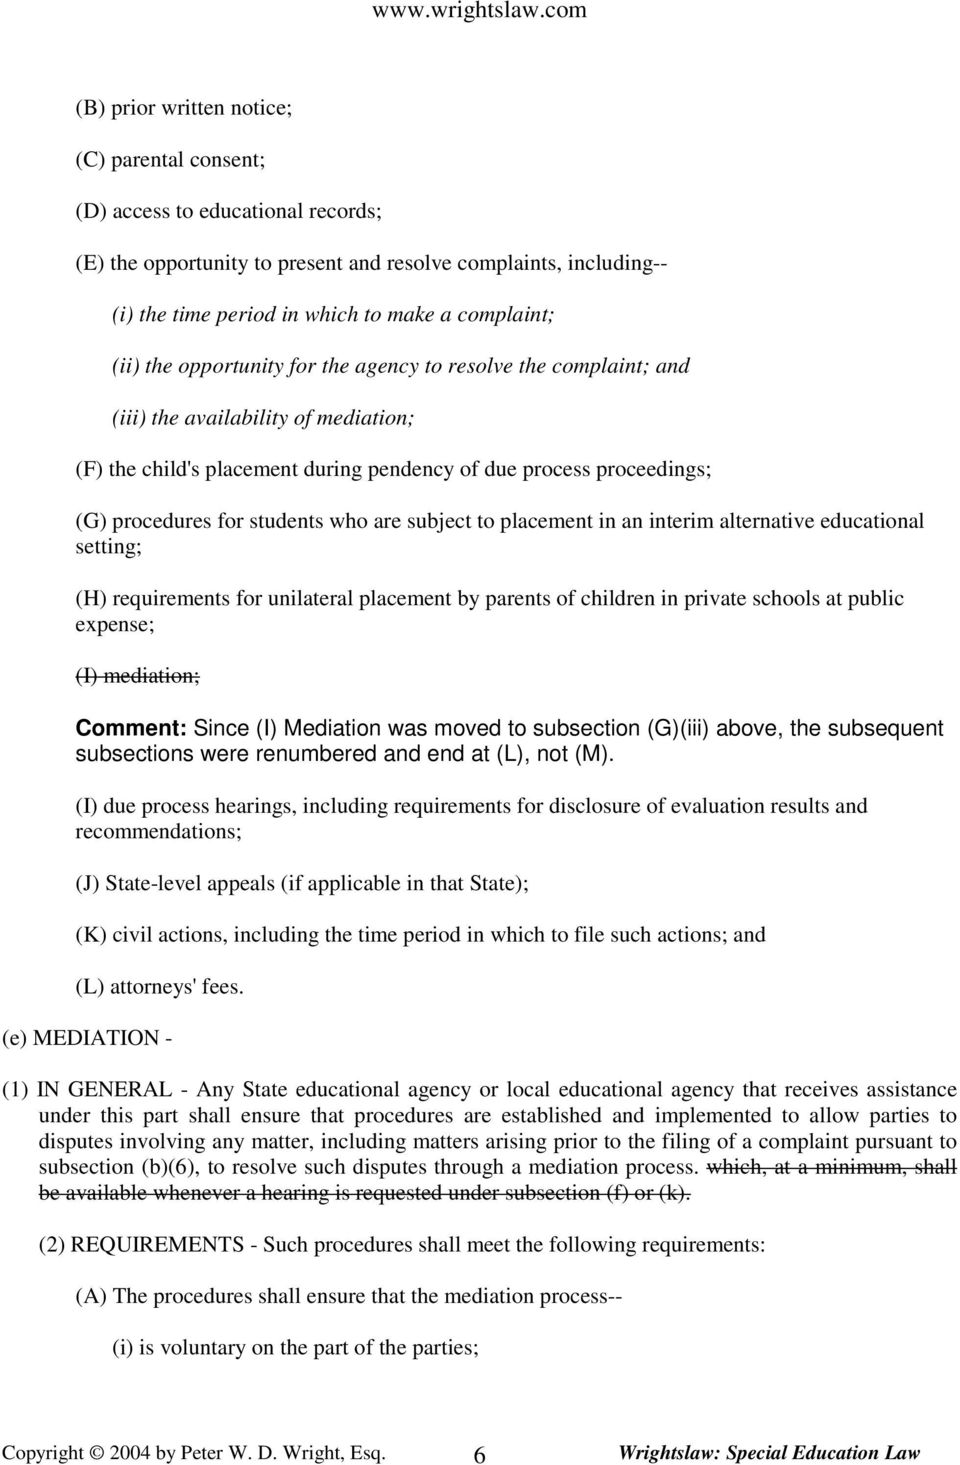 students who are subject to placement in an interim alternative educational setting; (H) requirements for unilateral placement by parents of children in private schools at public expense; (I)